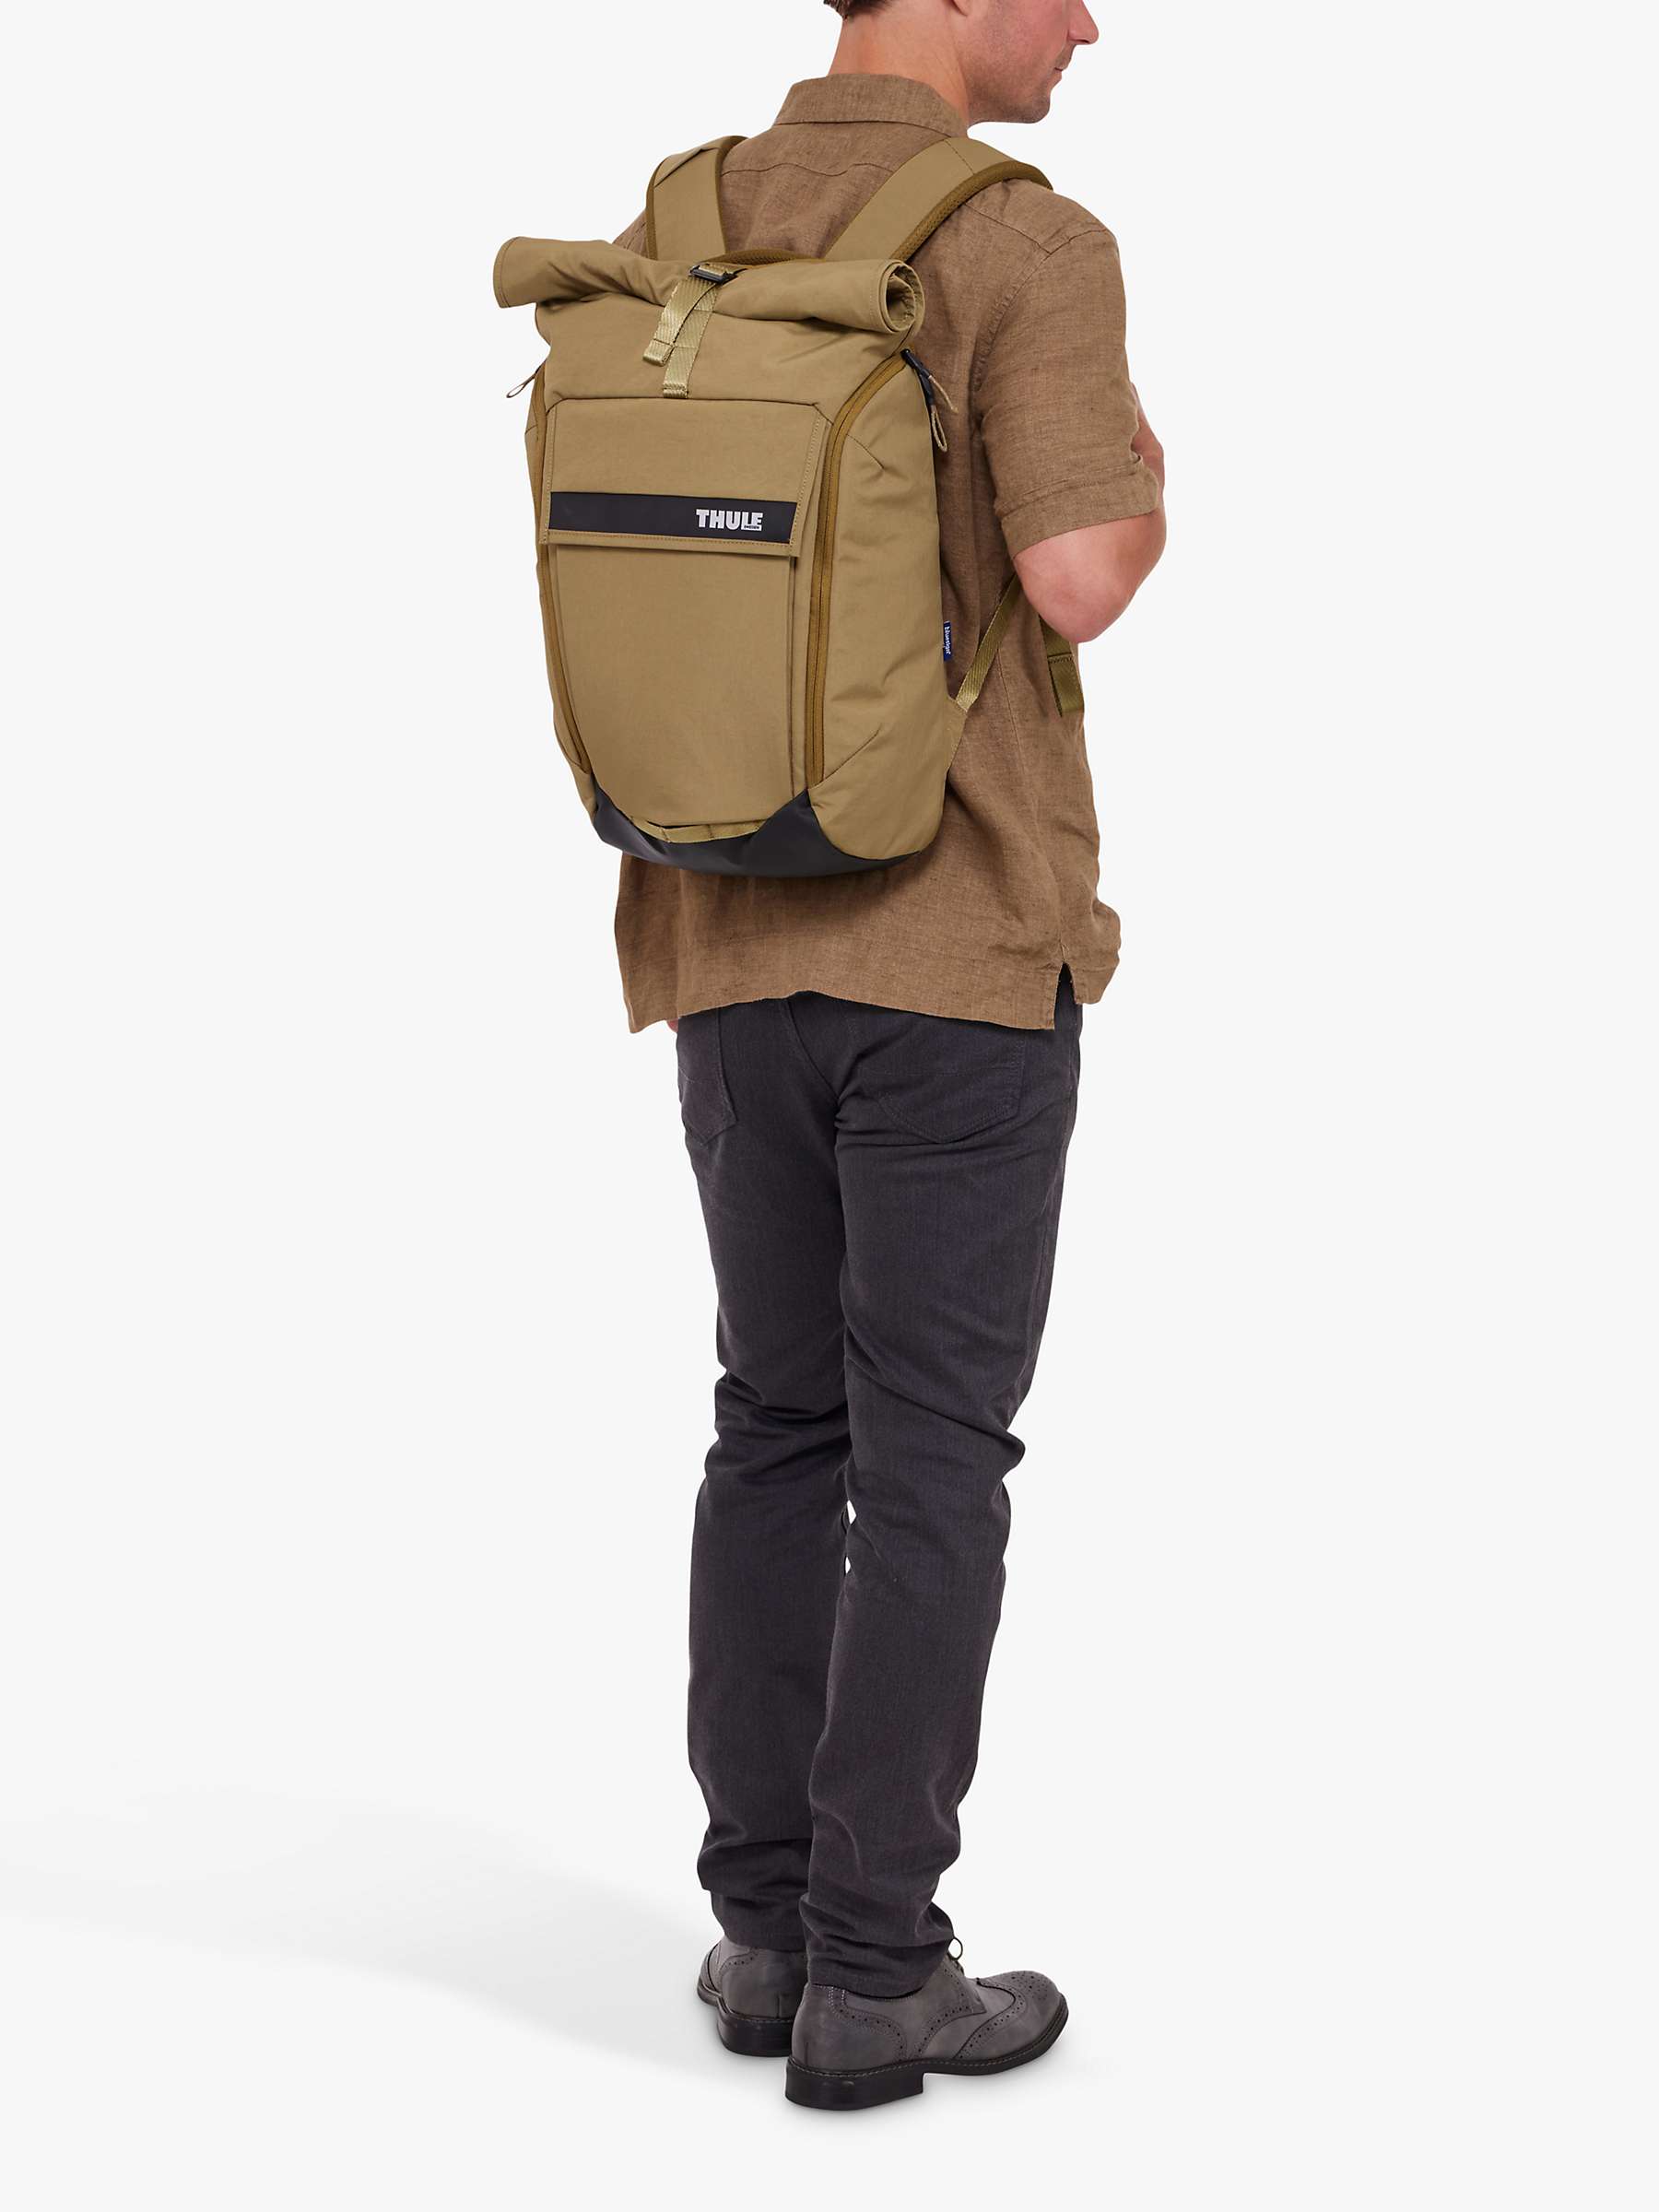 Buy Thule Paramount 24L Backpack Online at johnlewis.com